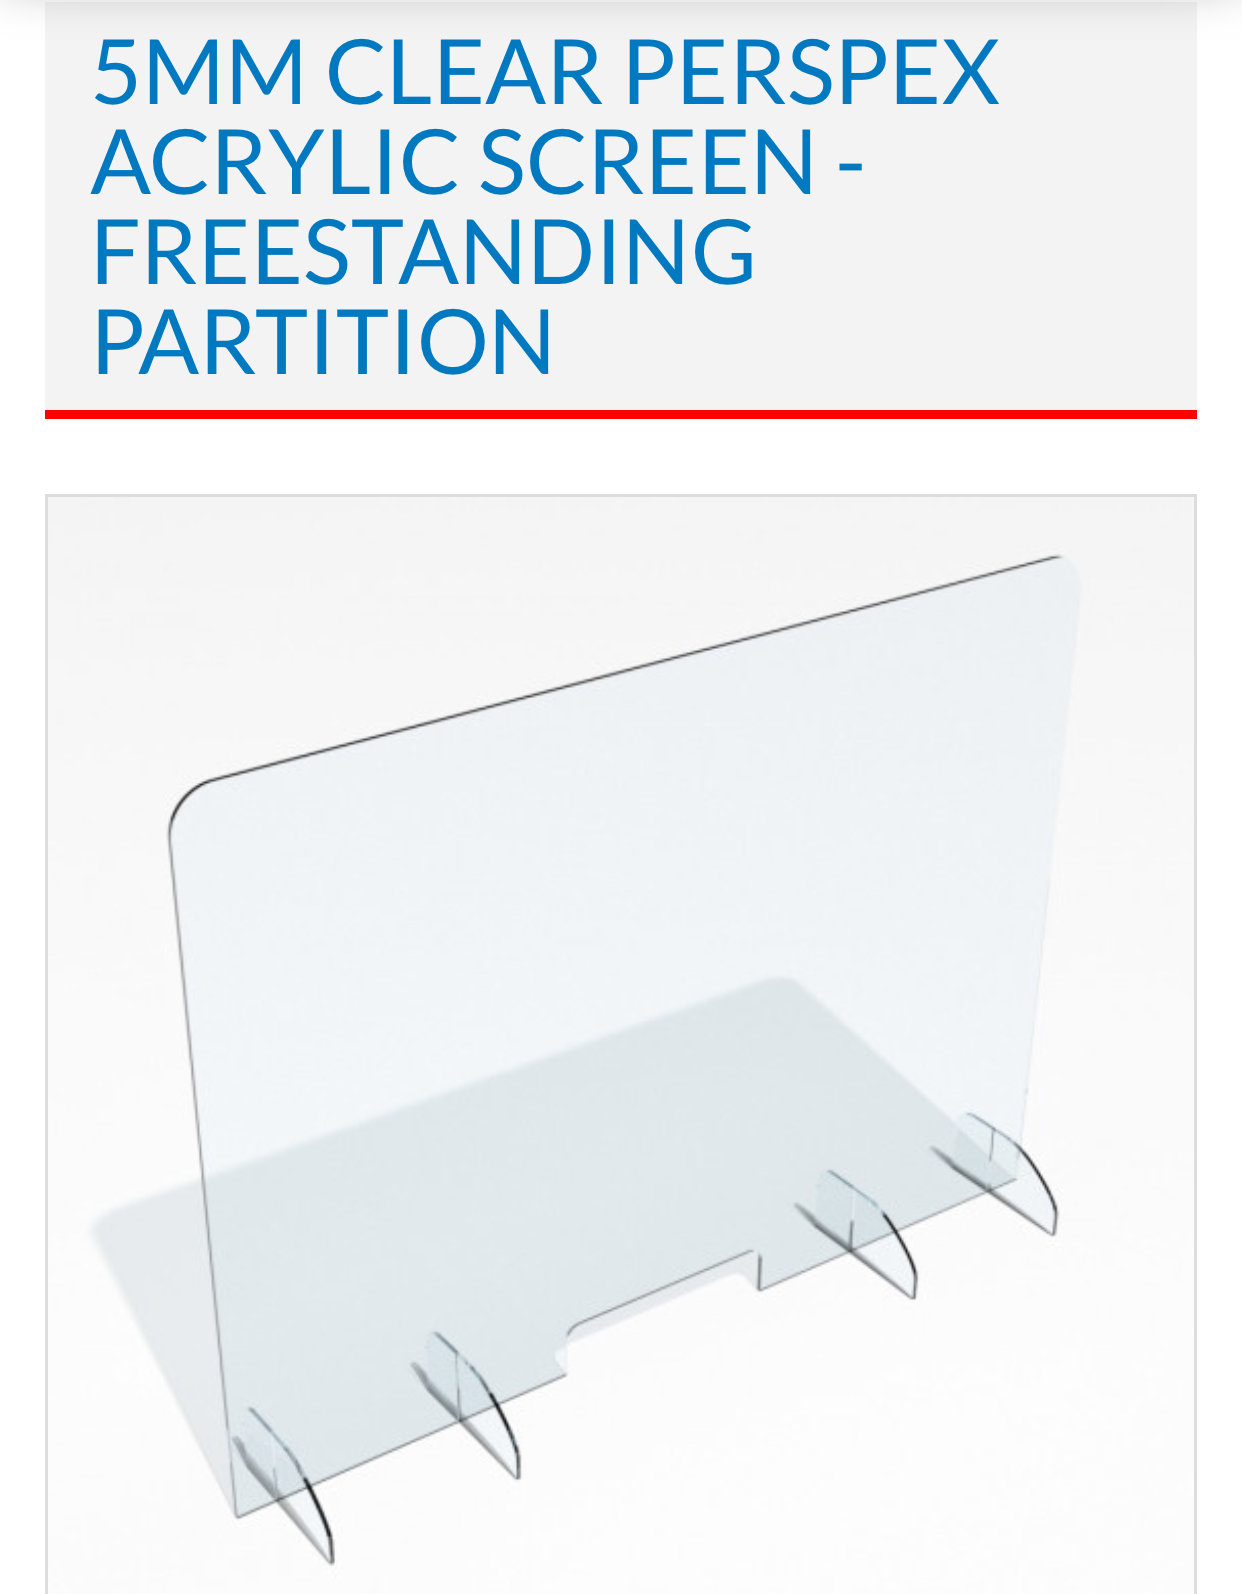 AFFORDABLE FREESTANDING ACRYLIC PROTECTIVE DESK / COUNTER SCREEN  1200 w x 900 h